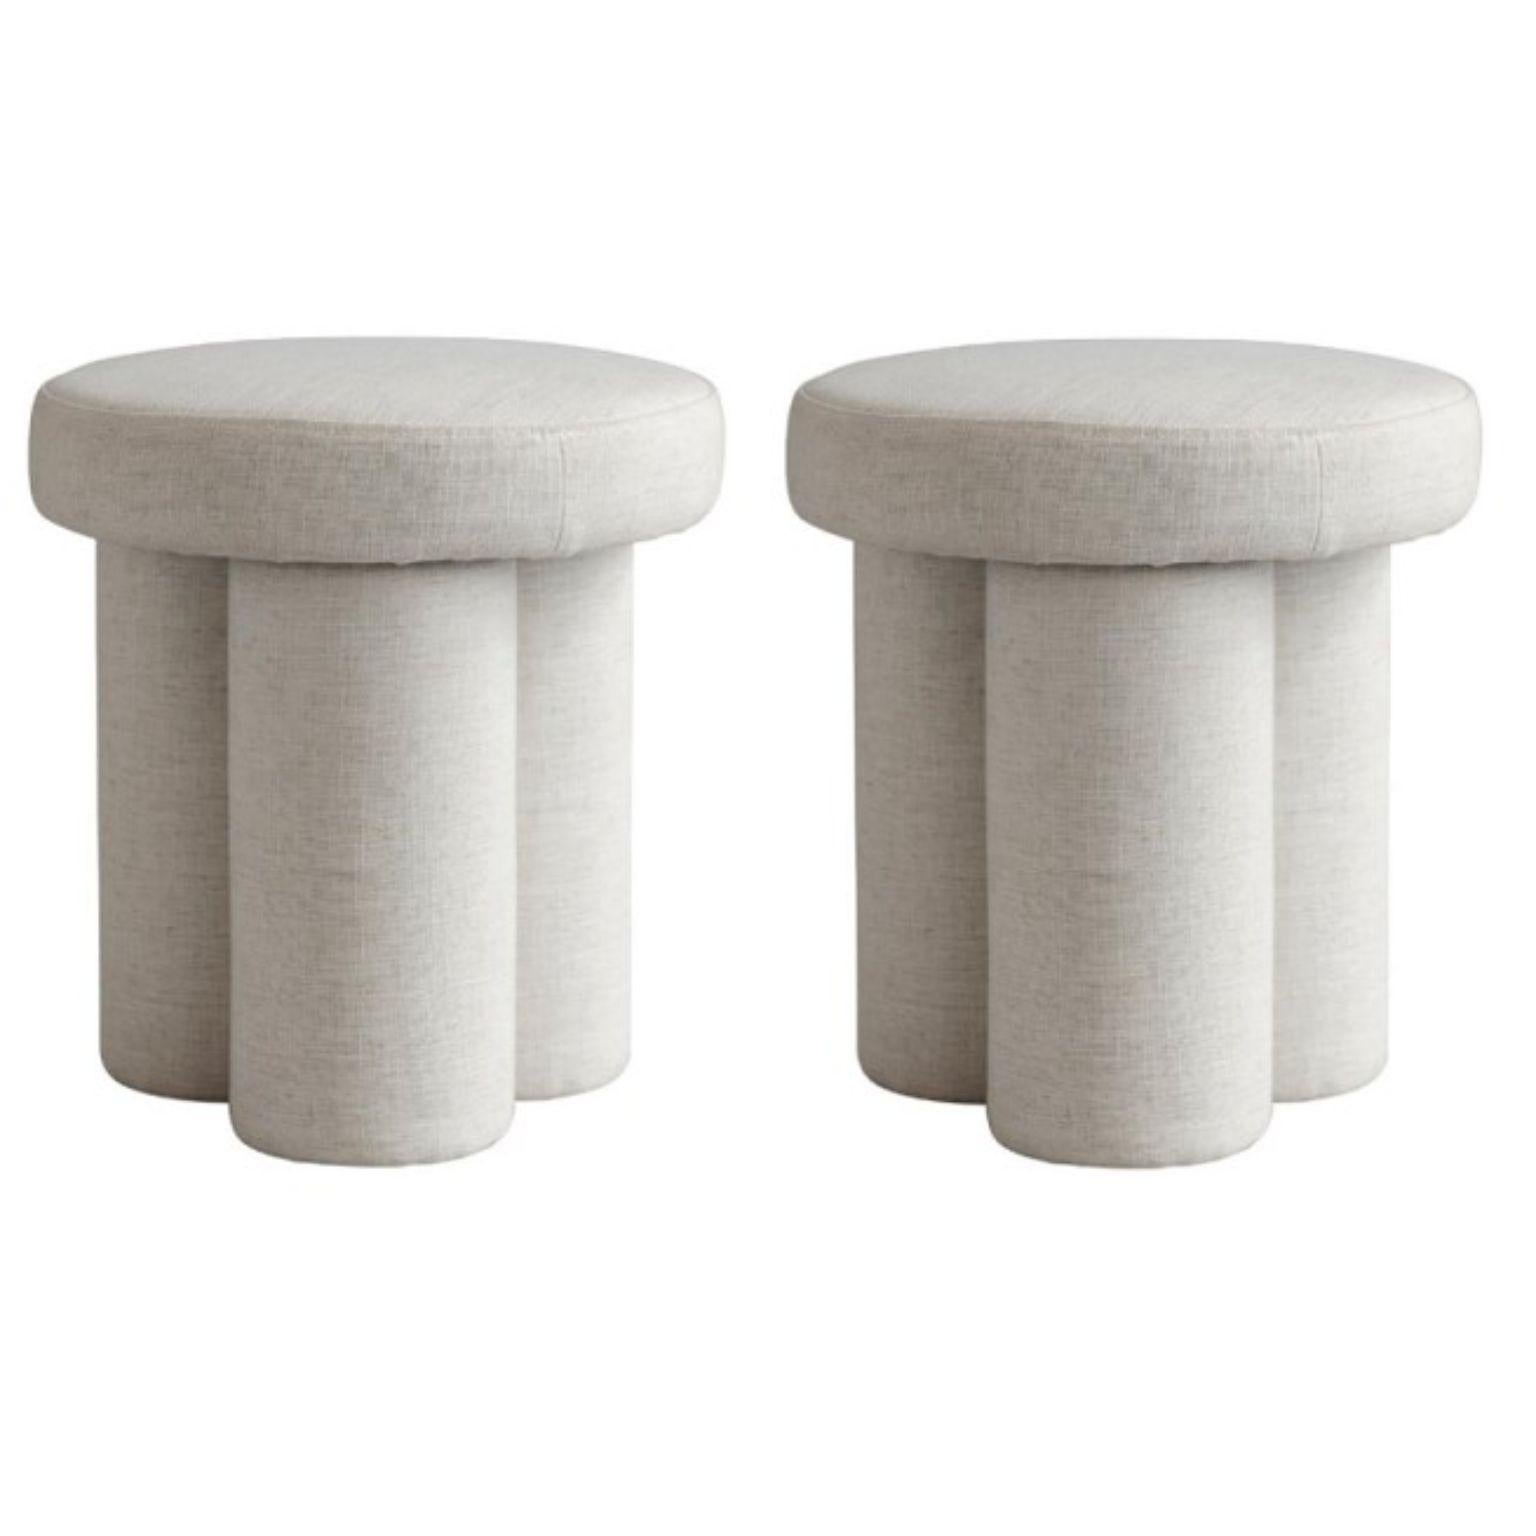 Set of 2 Linen Big Foot stools by 101 Copenhagen
Designed by Kristian Sofus Hansen & Tommy Hyldahl
Dimensions: L38 / W38 /H43 CM
Materials: Linen

A quirky and contemporary addition to any interior setting and family alike, the Big Foot Stool is